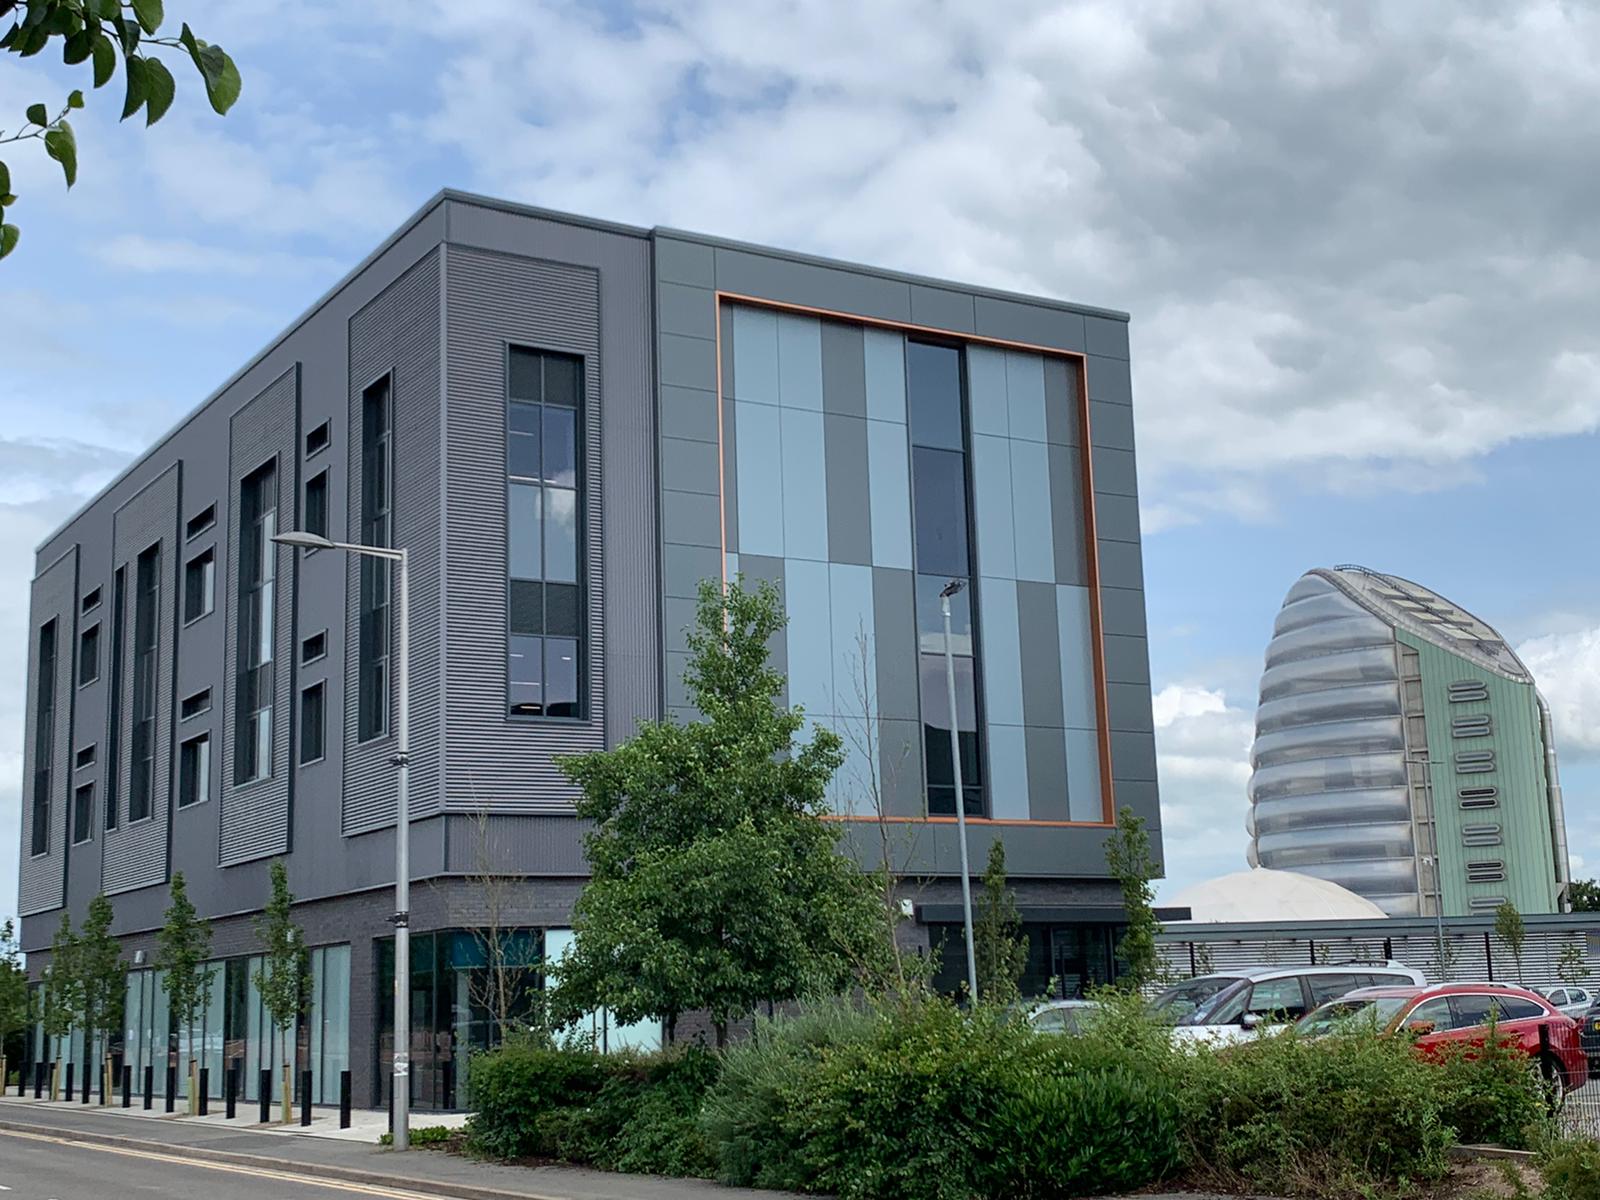 Reactive Components has opened a research center in Leicester, UK, specializing in composite materials research.